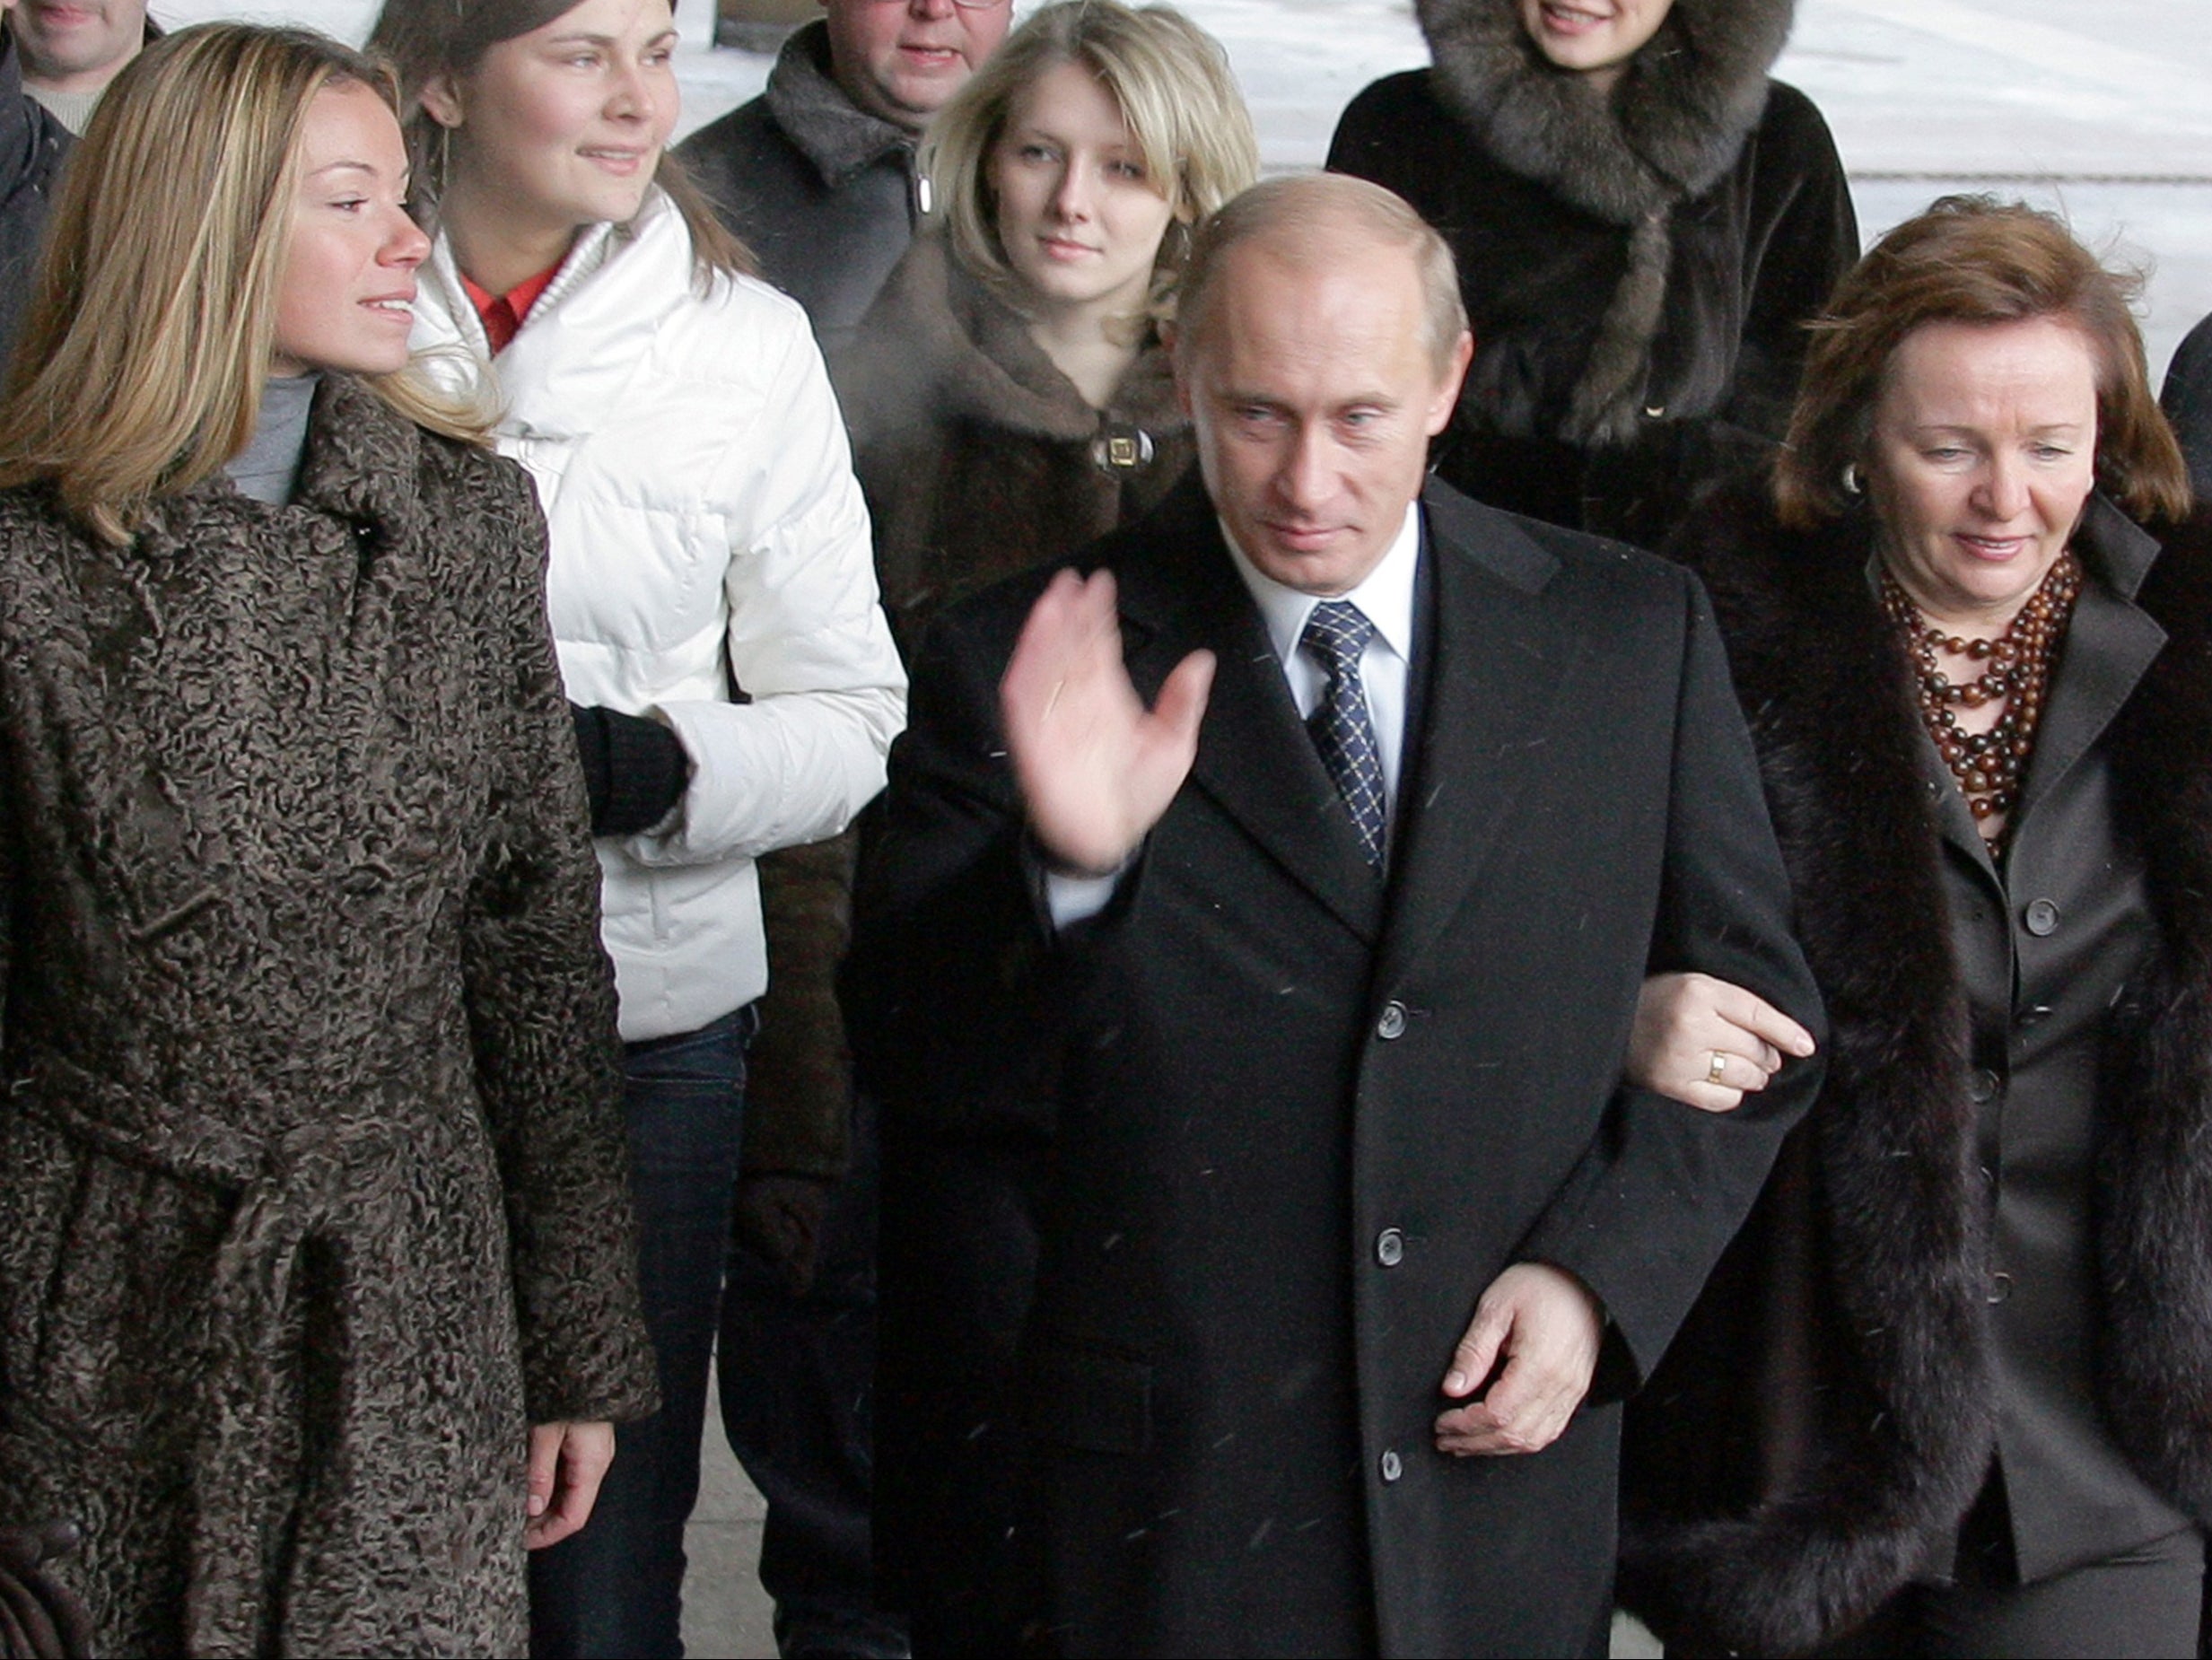 Russian president Vladimir Putin, with his ex-wife Ludmila and their daughter Maria (left) at a Moscow polling station in December 2007